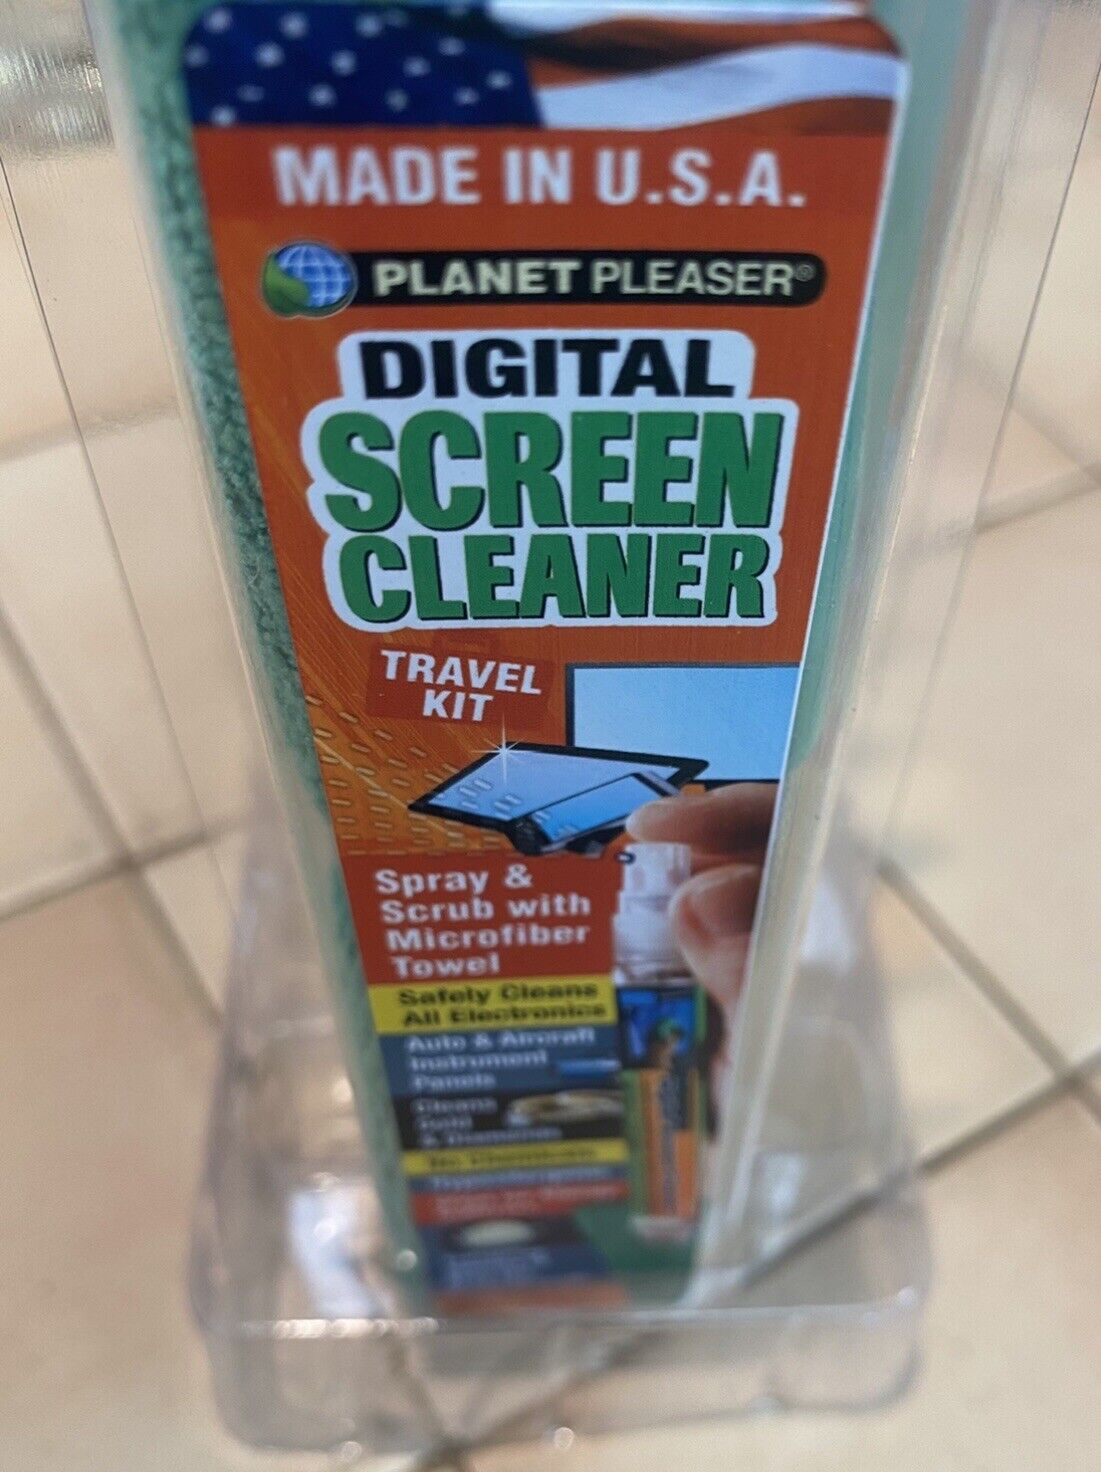 3 Boxes of 18 Planet Pleaser Digital Screen Cleaner Travel Kit-12ml. Made In USA